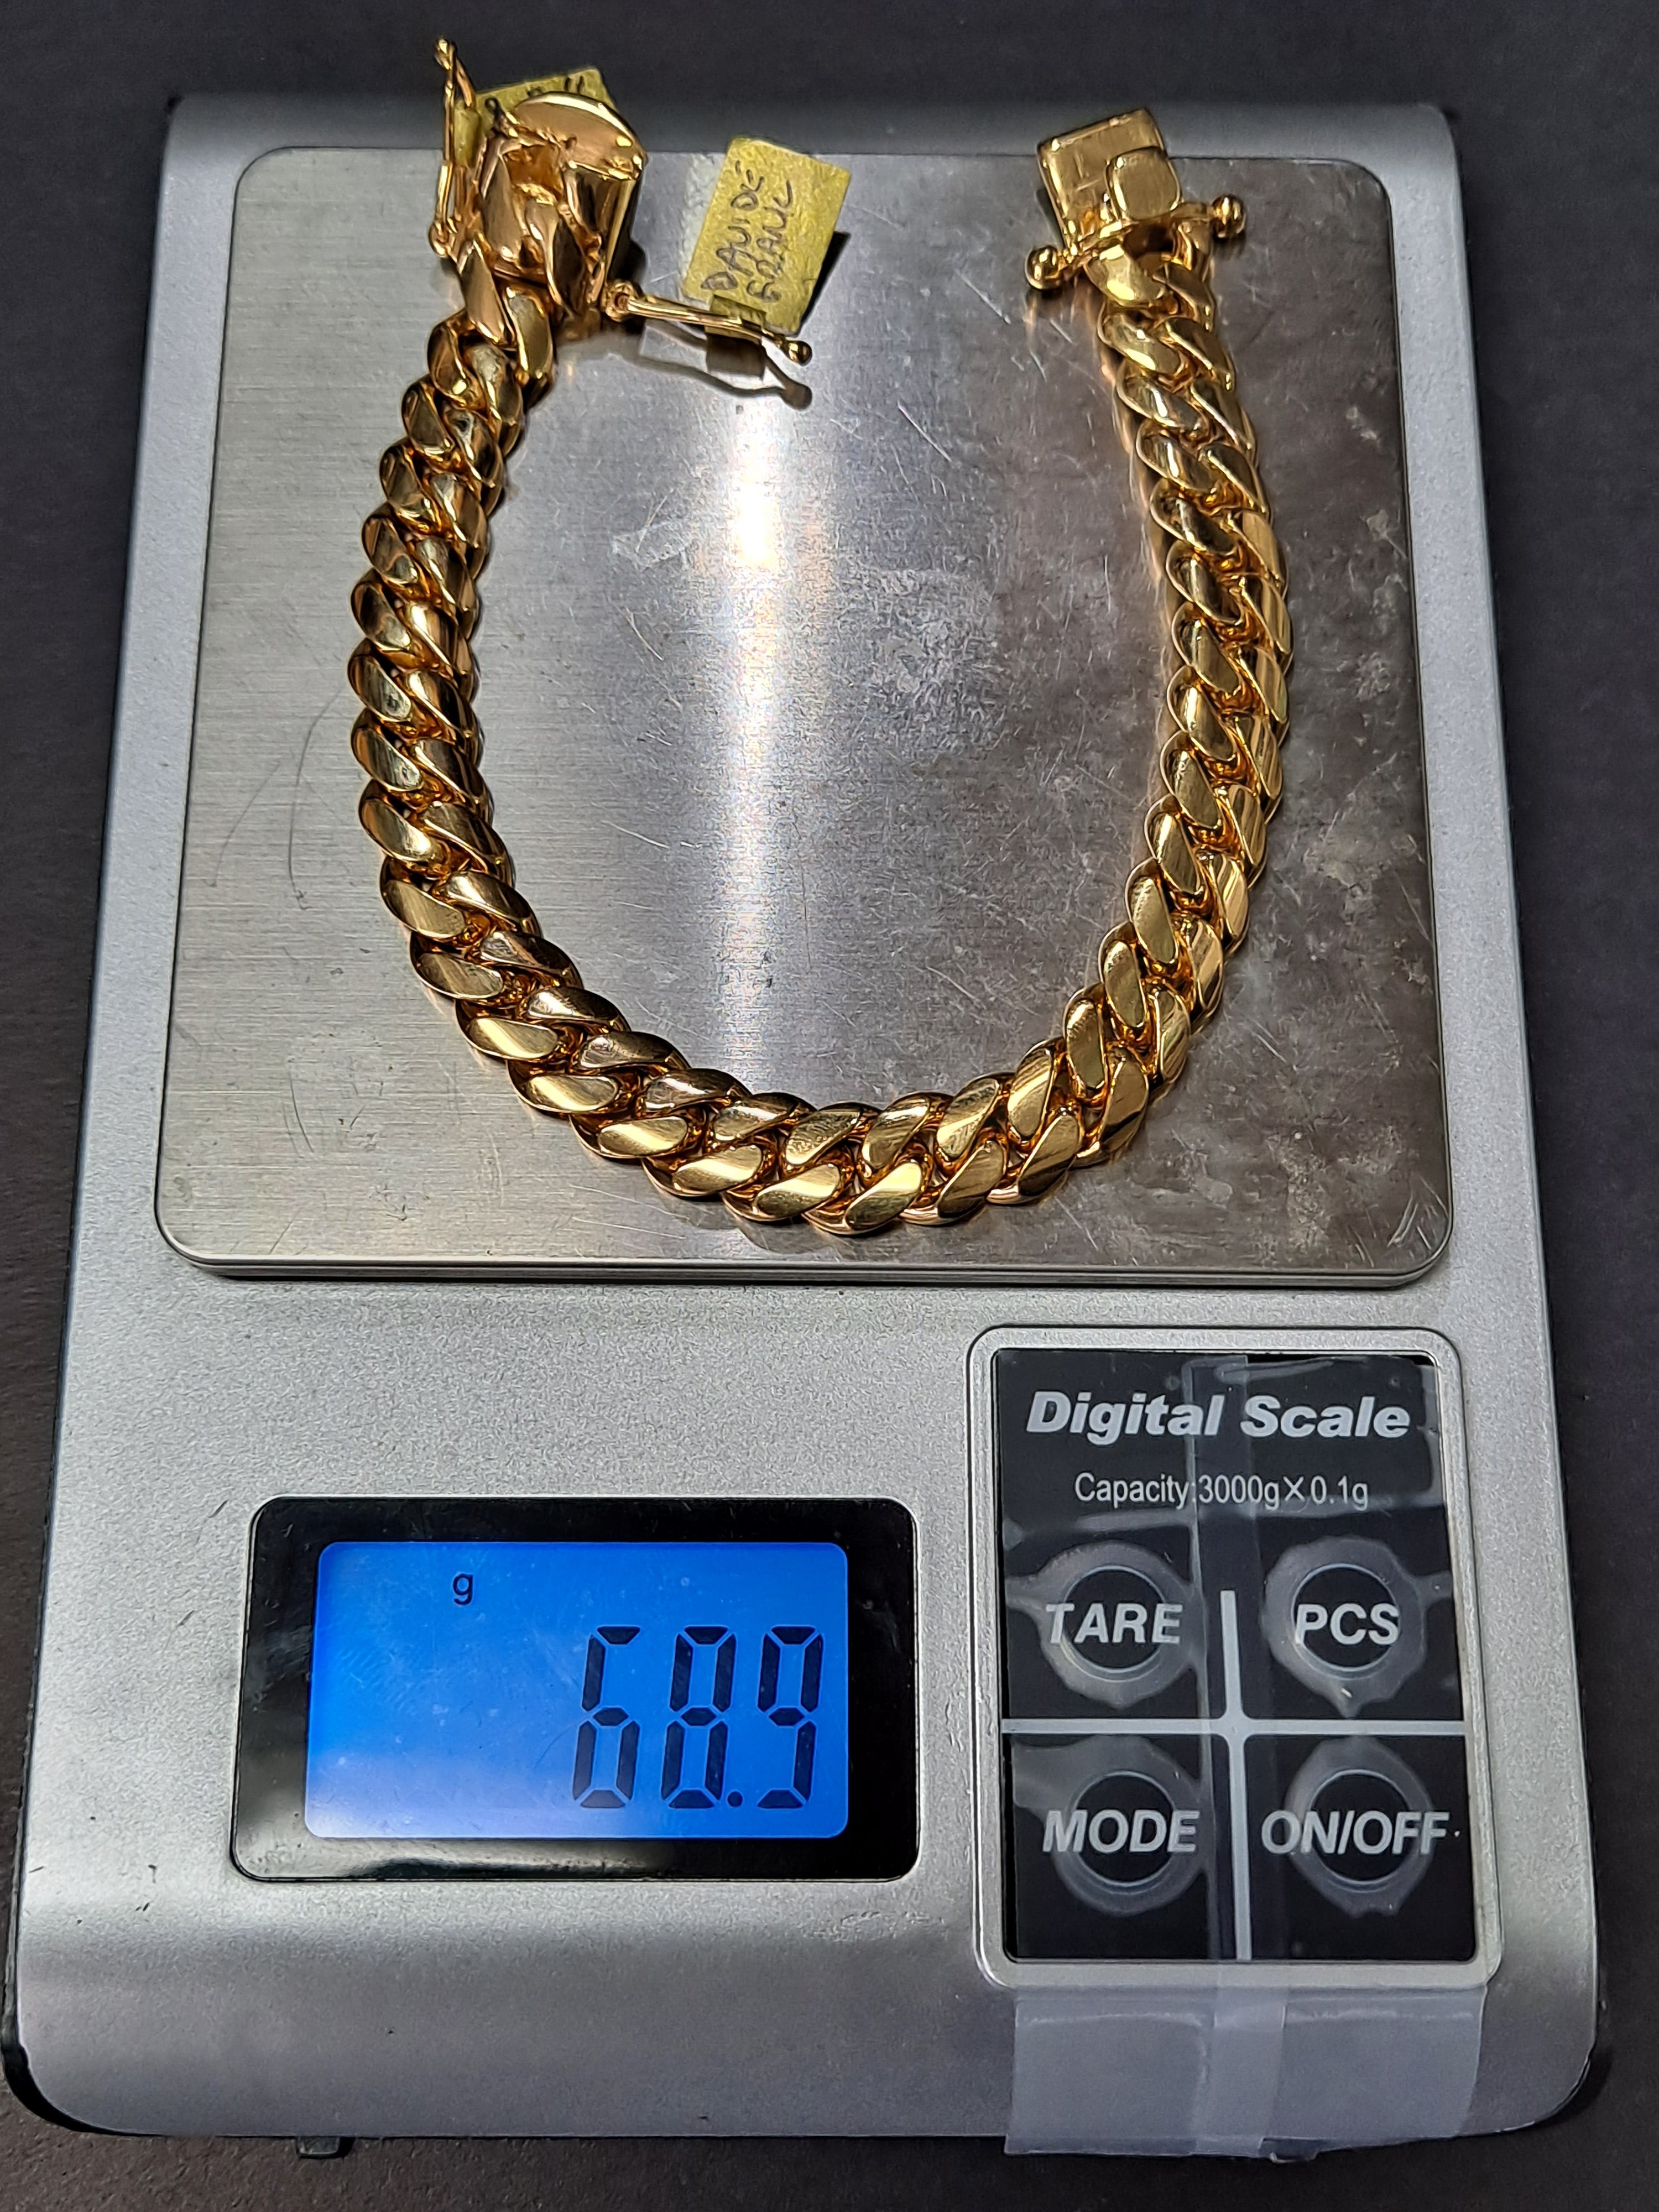 new 14k miami solid cuban link bracelet, 10mm 68.9 grams 8.5 inches